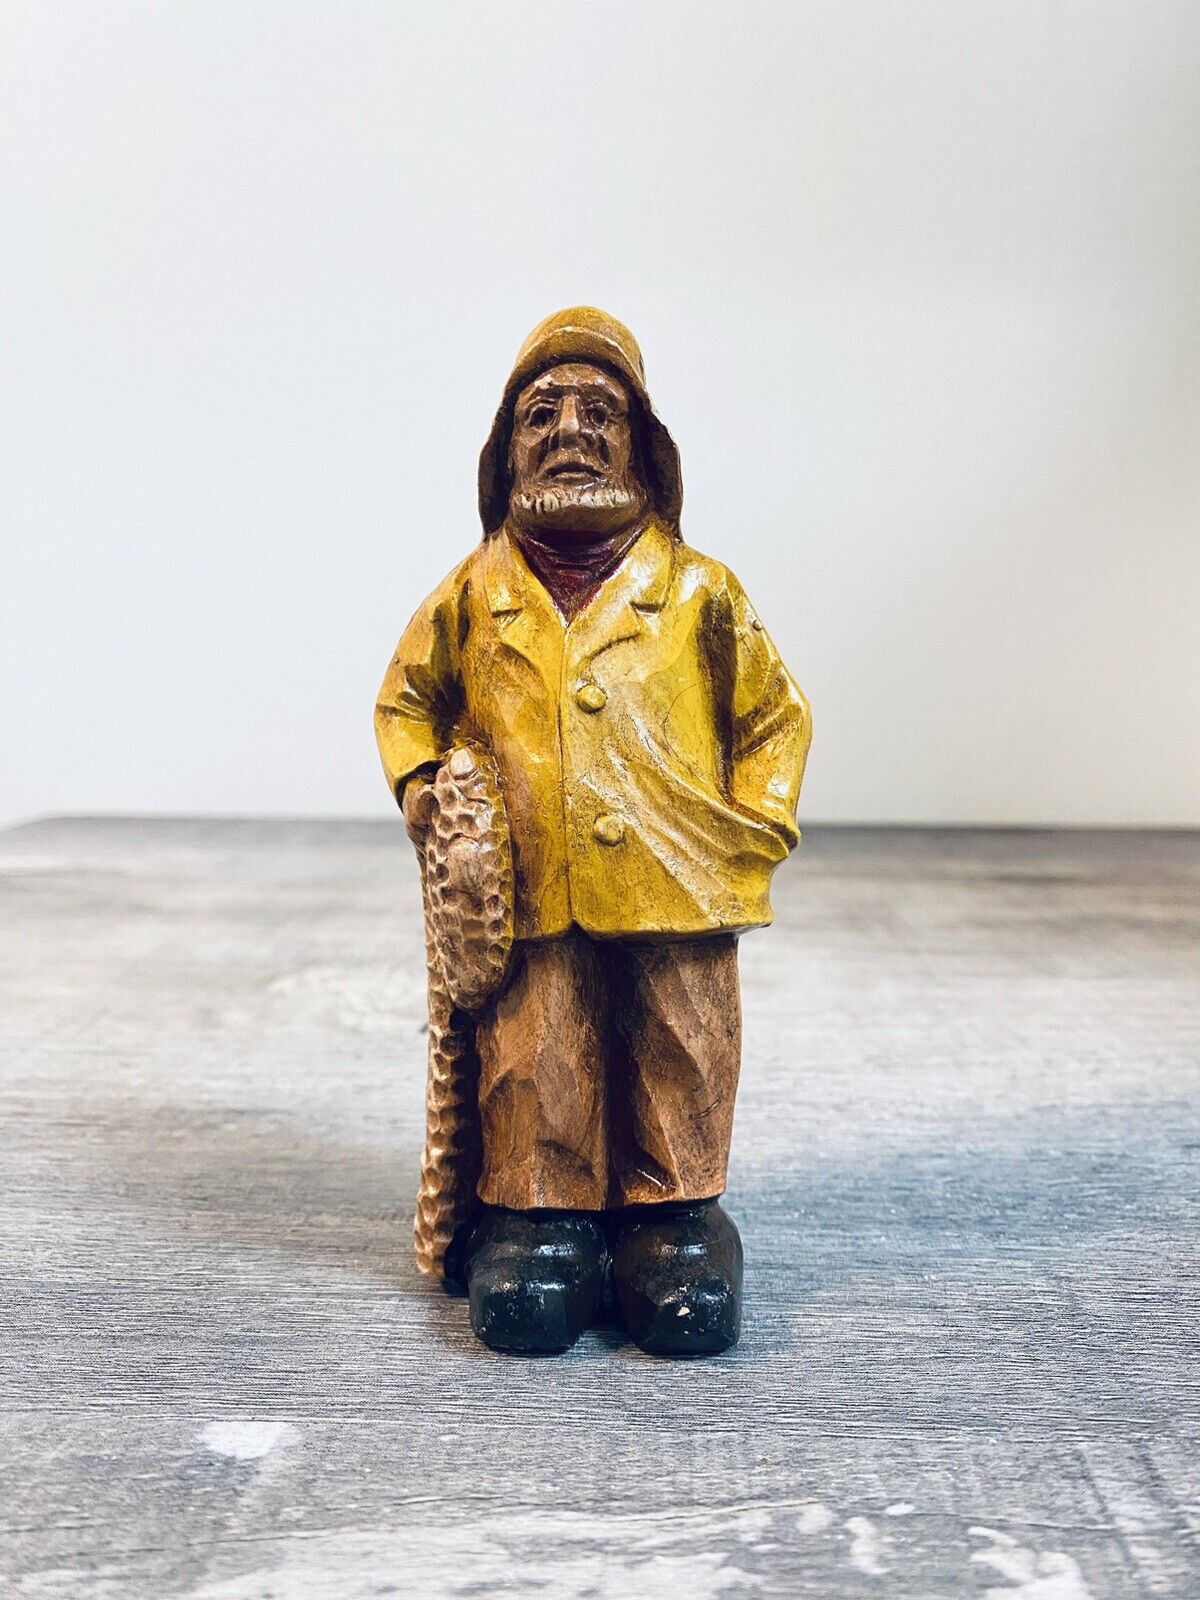 Vintage Sea Captain Figurine - Resin - 5.5 inches tall